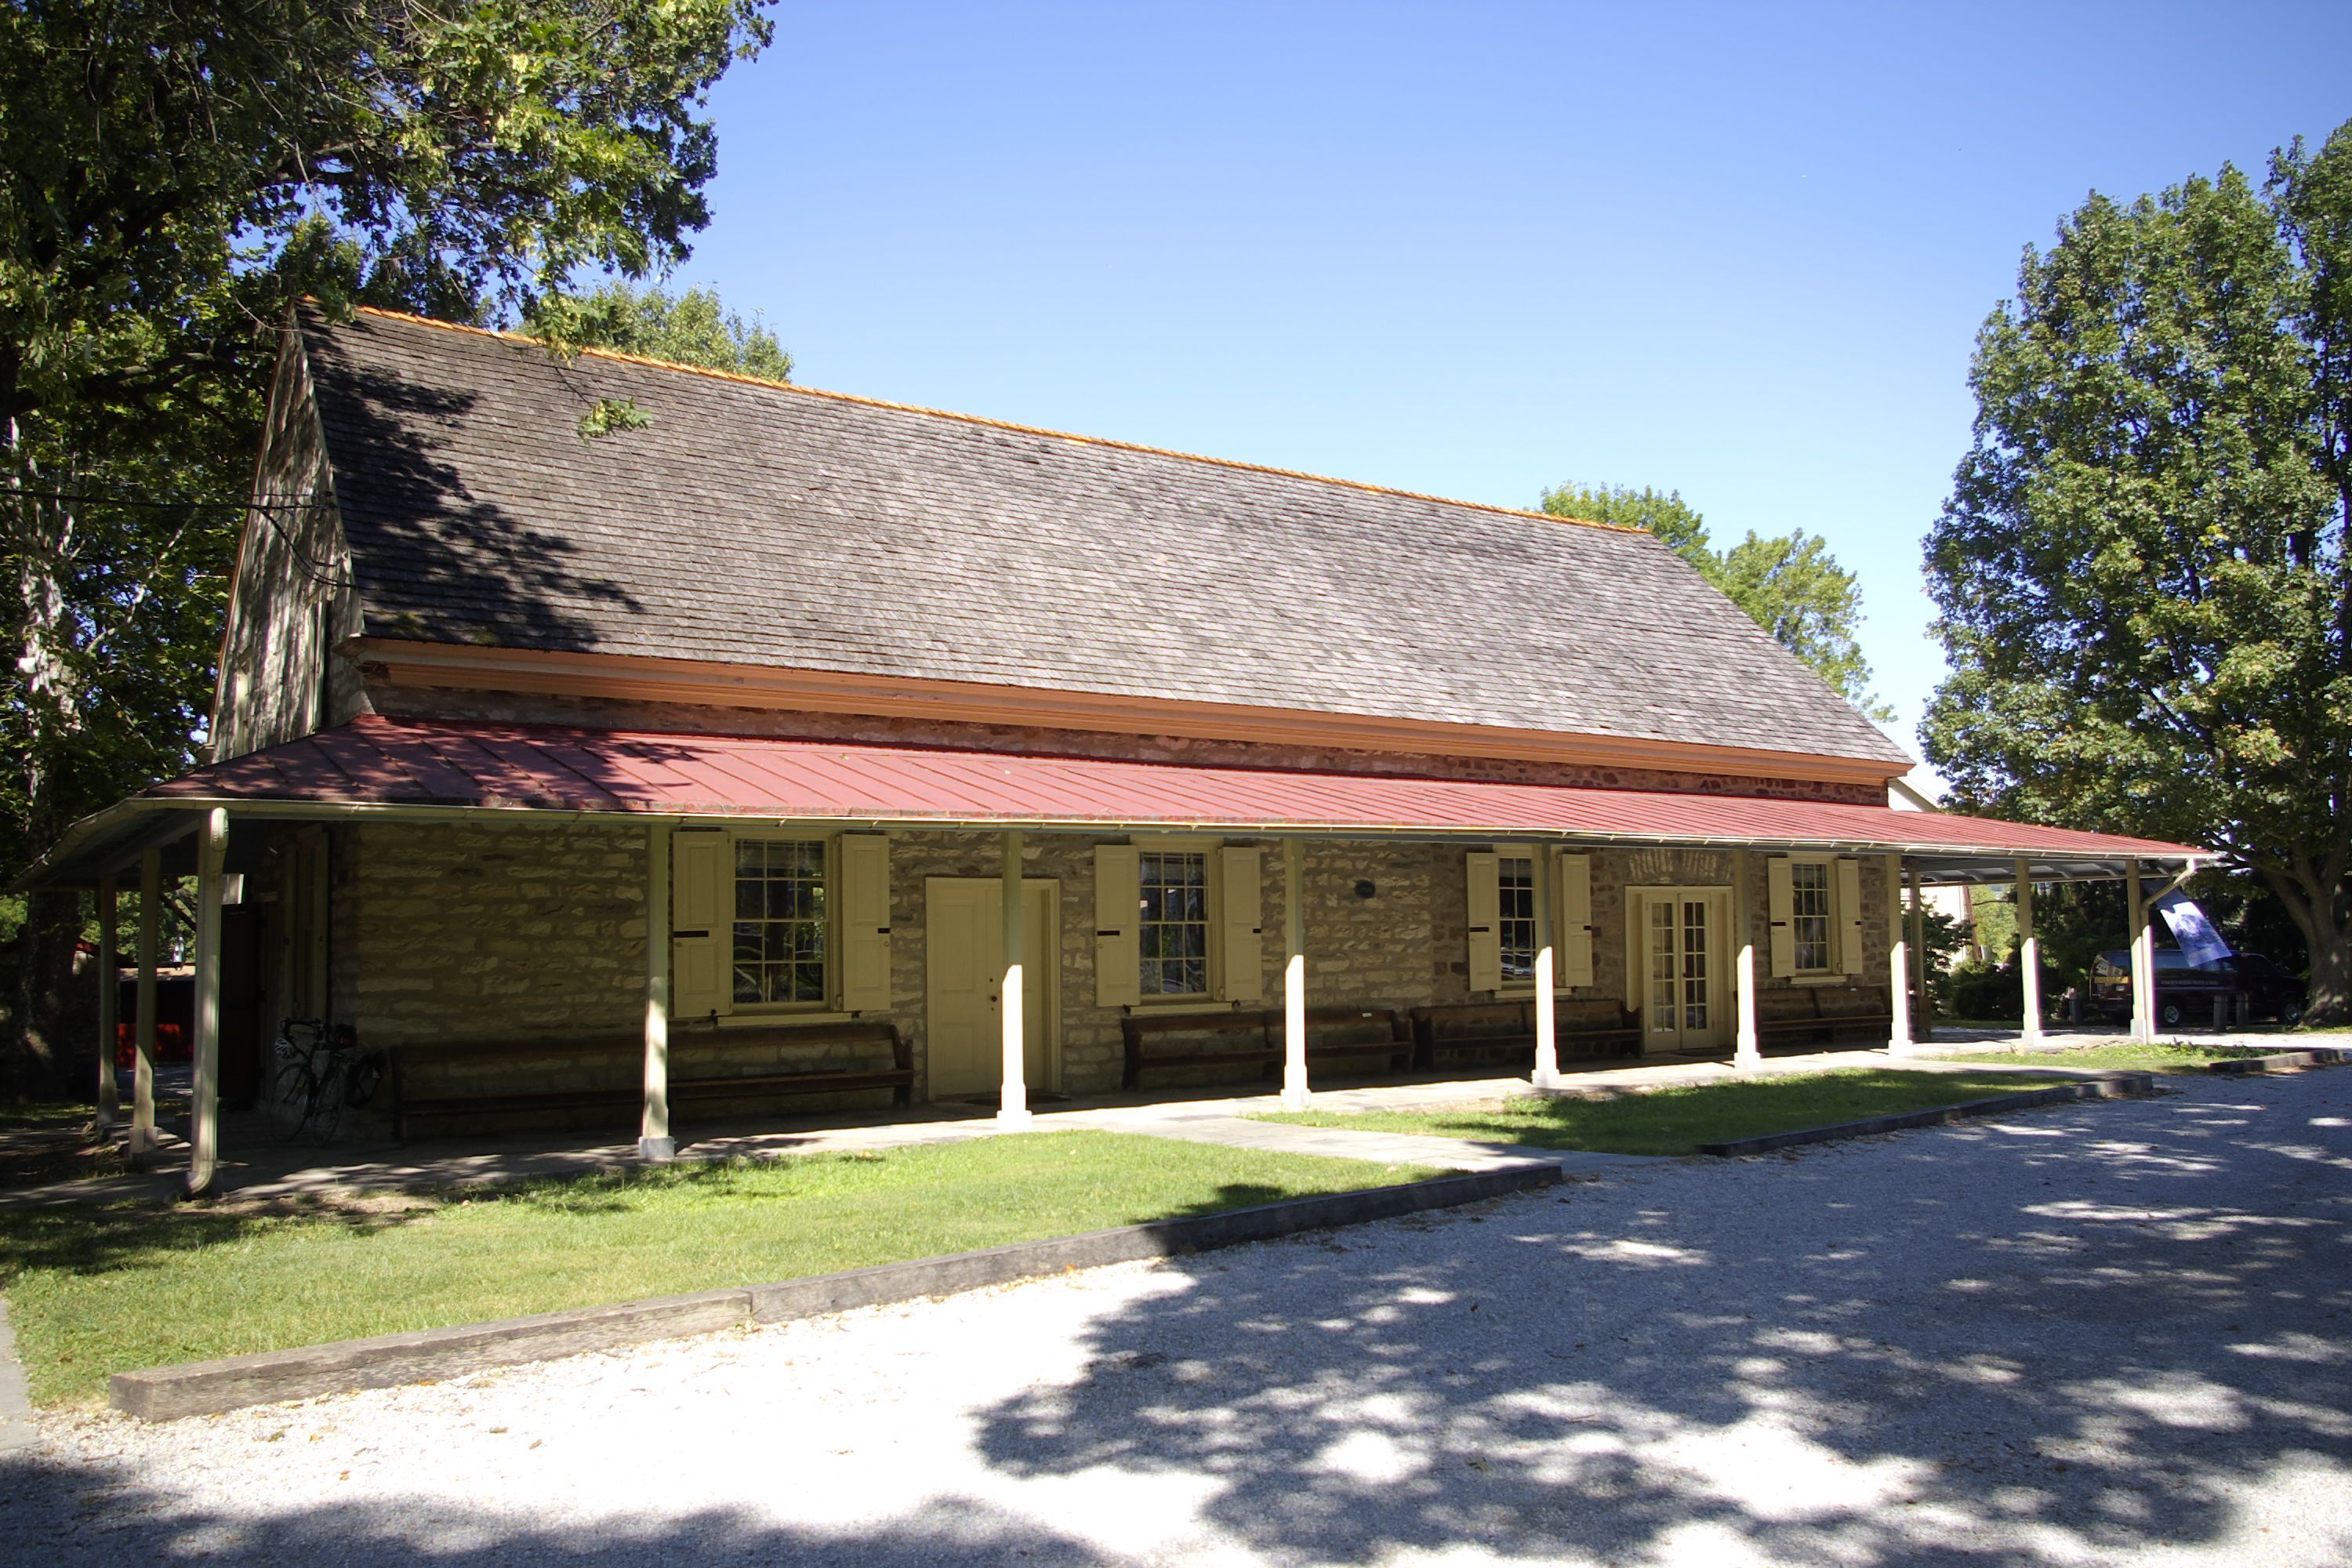 Meeting House in Summer